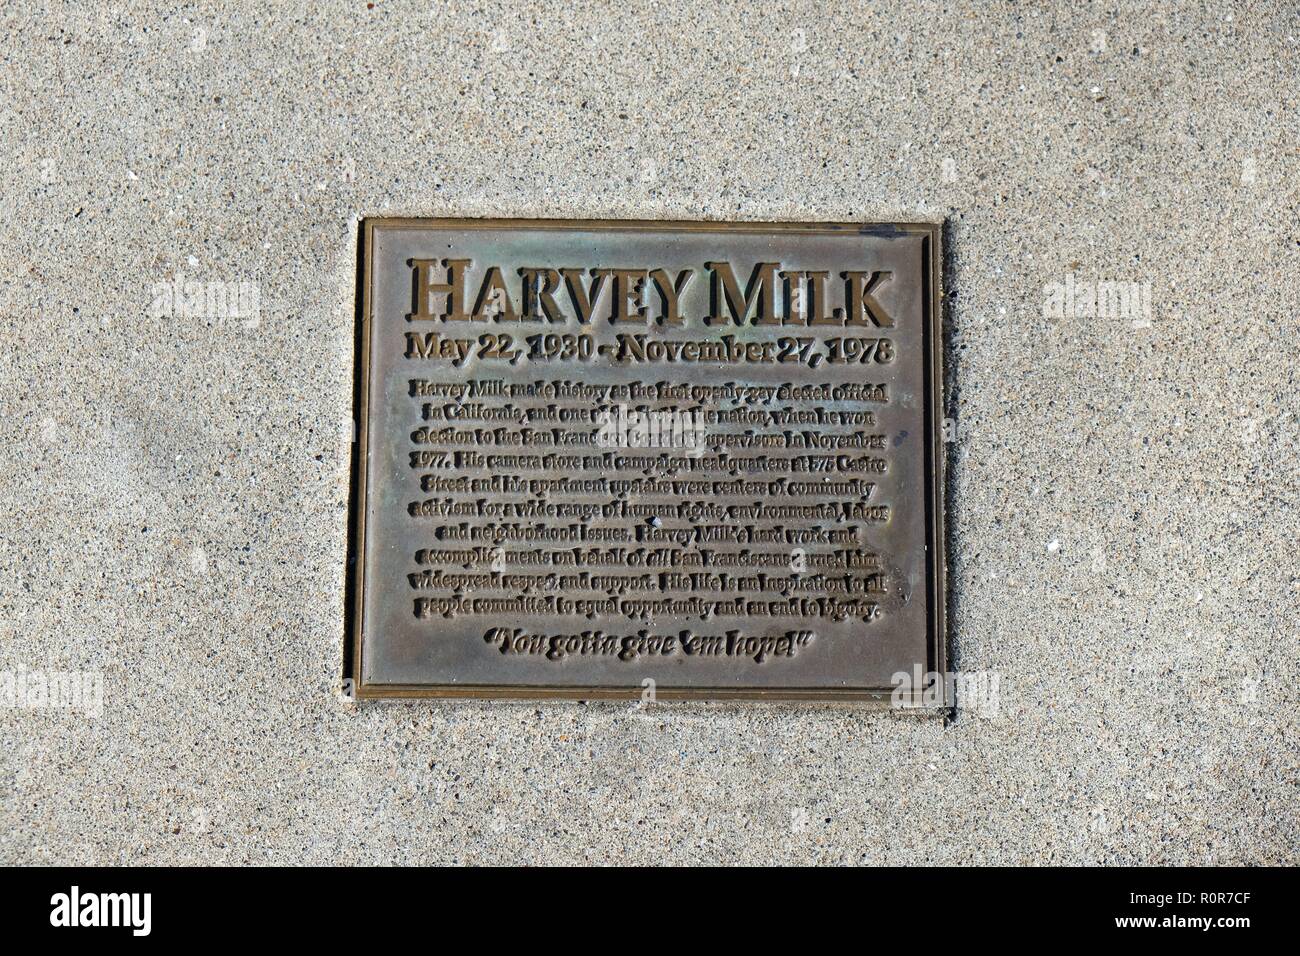 Sidewalk plaque where Harvey Milk's ashes were interred on the sidewalk outside his camera store on Castro Street, Castro District, San Francisco, CA. Stock Photo